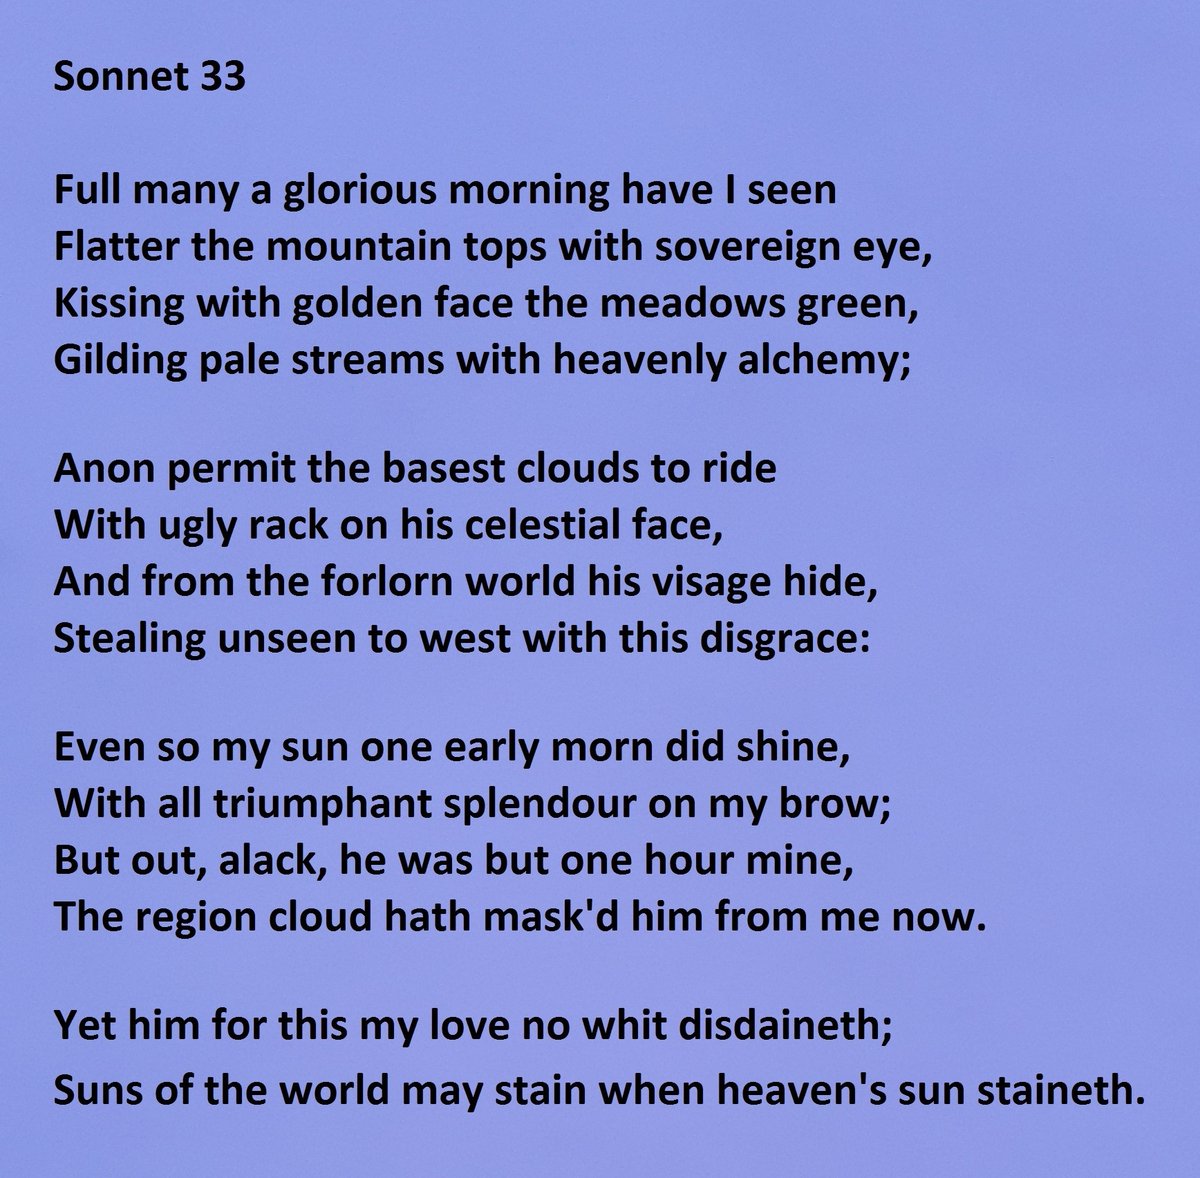 Sonnet 33 by William Shakespeare "Full many a glorious morning have I seen"